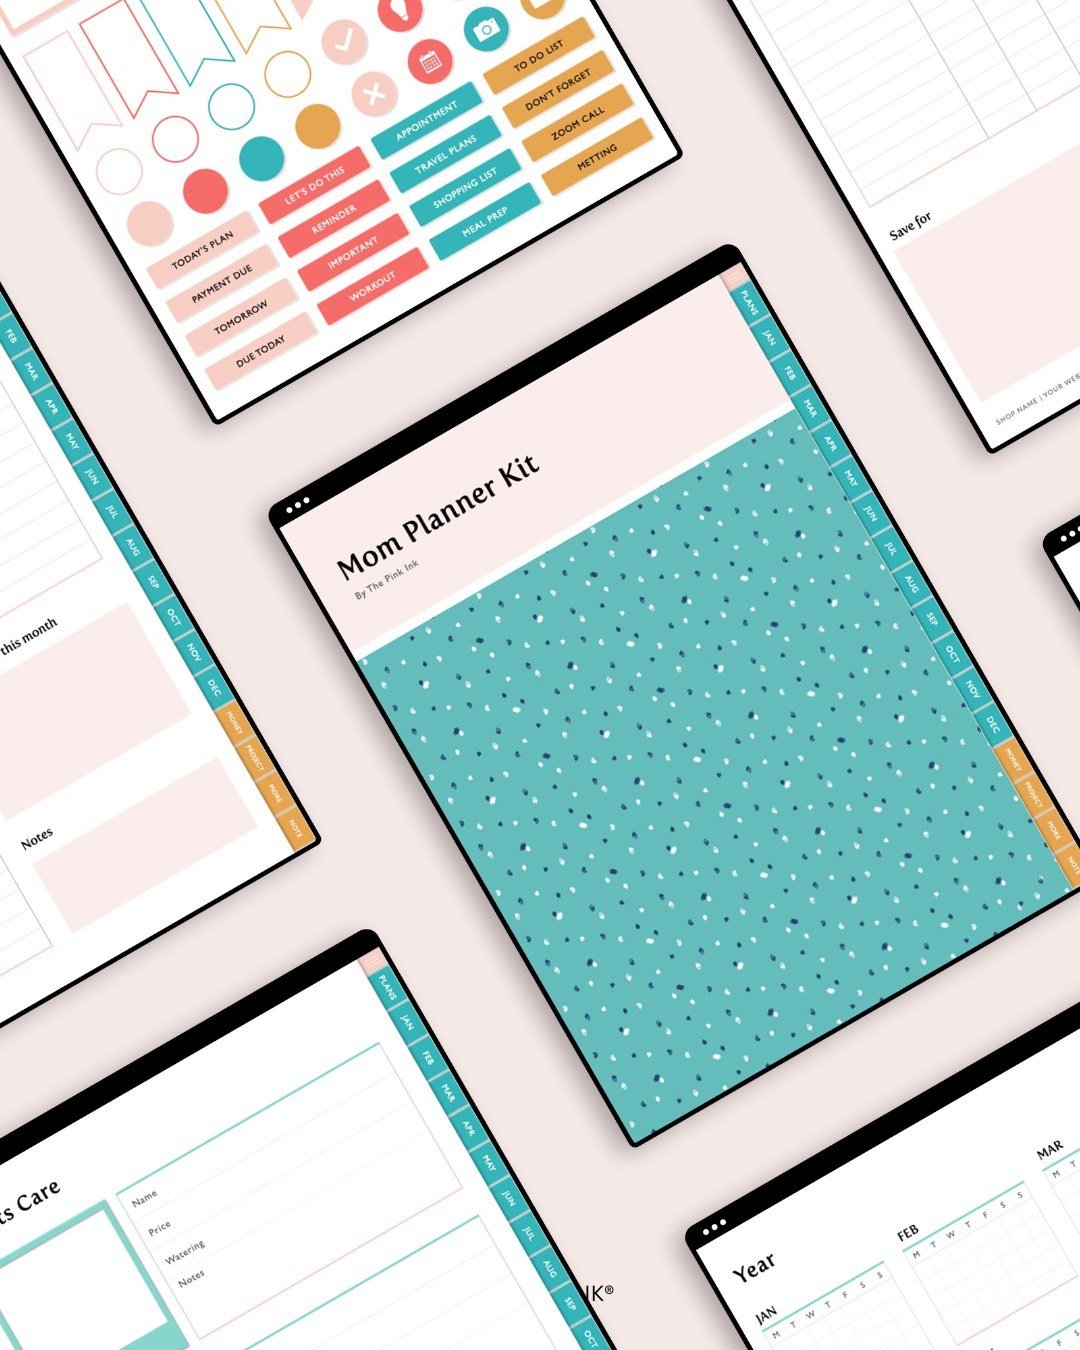 Feeling overwhelmed trying to balance family life while pursuing your entrepreneurial dreams? 🤔⁠
⁠
The Mom Edition Digital Planner Kit is here to help! ✨⁠
⁠
With its customizable templates, you can effortlessly organize your life and turn your mom s